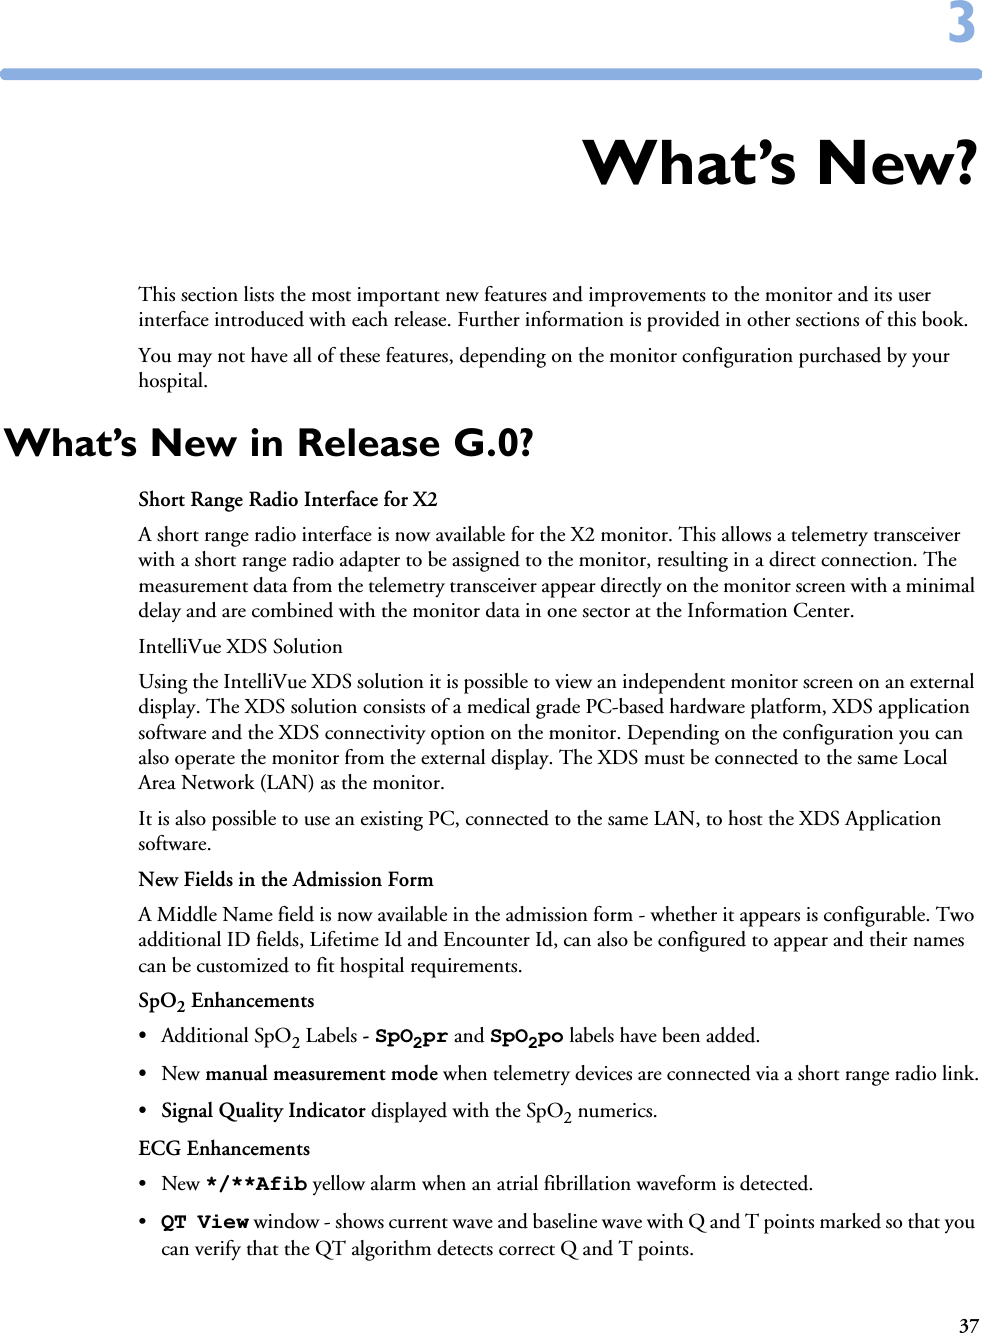 3733What’s New?This section lists the most important new features and improvements to the monitor and its user interface introduced with each release. Further information is provided in other sections of this book. You may not have all of these features, depending on the monitor configuration purchased by your hospital.What’s New in Release G.0?Short Range Radio Interface for X2A short range radio interface is now available for the X2 monitor. This allows a telemetry transceiver with a short range radio adapter to be assigned to the monitor, resulting in a direct connection. The measurement data from the telemetry transceiver appear directly on the monitor screen with a minimal delay and are combined with the monitor data in one sector at the Information Center. IntelliVue XDS SolutionUsing the IntelliVue XDS solution it is possible to view an independent monitor screen on an external display. The XDS solution consists of a medical grade PC-based hardware platform, XDS application software and the XDS connectivity option on the monitor. Depending on the configuration you can also operate the monitor from the external display. The XDS must be connected to the same Local Area Network (LAN) as the monitor. It is also possible to use an existing PC, connected to the same LAN, to host the XDS Application software.New Fields in the Admission FormA Middle Name field is now available in the admission form - whether it appears is configurable. Two additional ID fields, Lifetime Id and Encounter Id, can also be configured to appear and their names can be customized to fit hospital requirements. SpO2 Enhancements•Additional SpO2 Labels - SpO2pr and SpO2po labels have been added.•New manual measurement mode when telemetry devices are connected via a short range radio link.• Signal Quality Indicator displayed with the SpO2 numerics. ECG Enhancements•New */**Afib yellow alarm when an atrial fibrillation waveform is detected.•QT View window - shows current wave and baseline wave with Q and T points marked so that you can verify that the QT algorithm detects correct Q and T points.